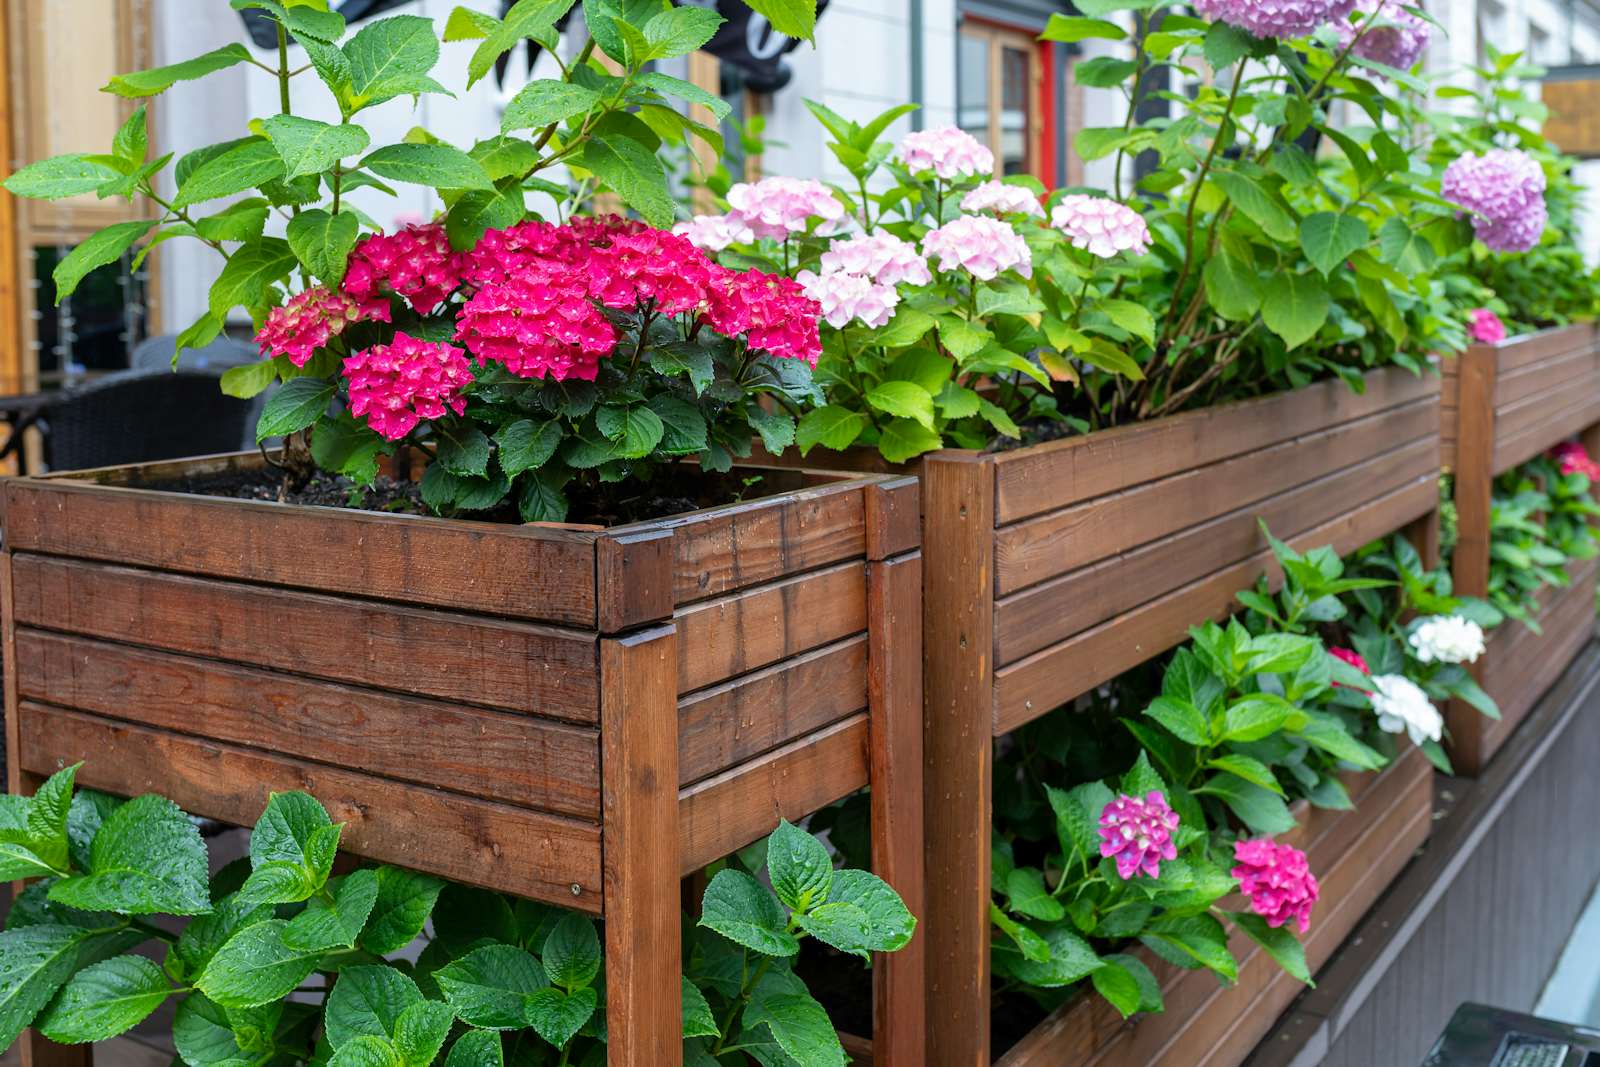 Flowering hydrangea bushes in wooden boxes